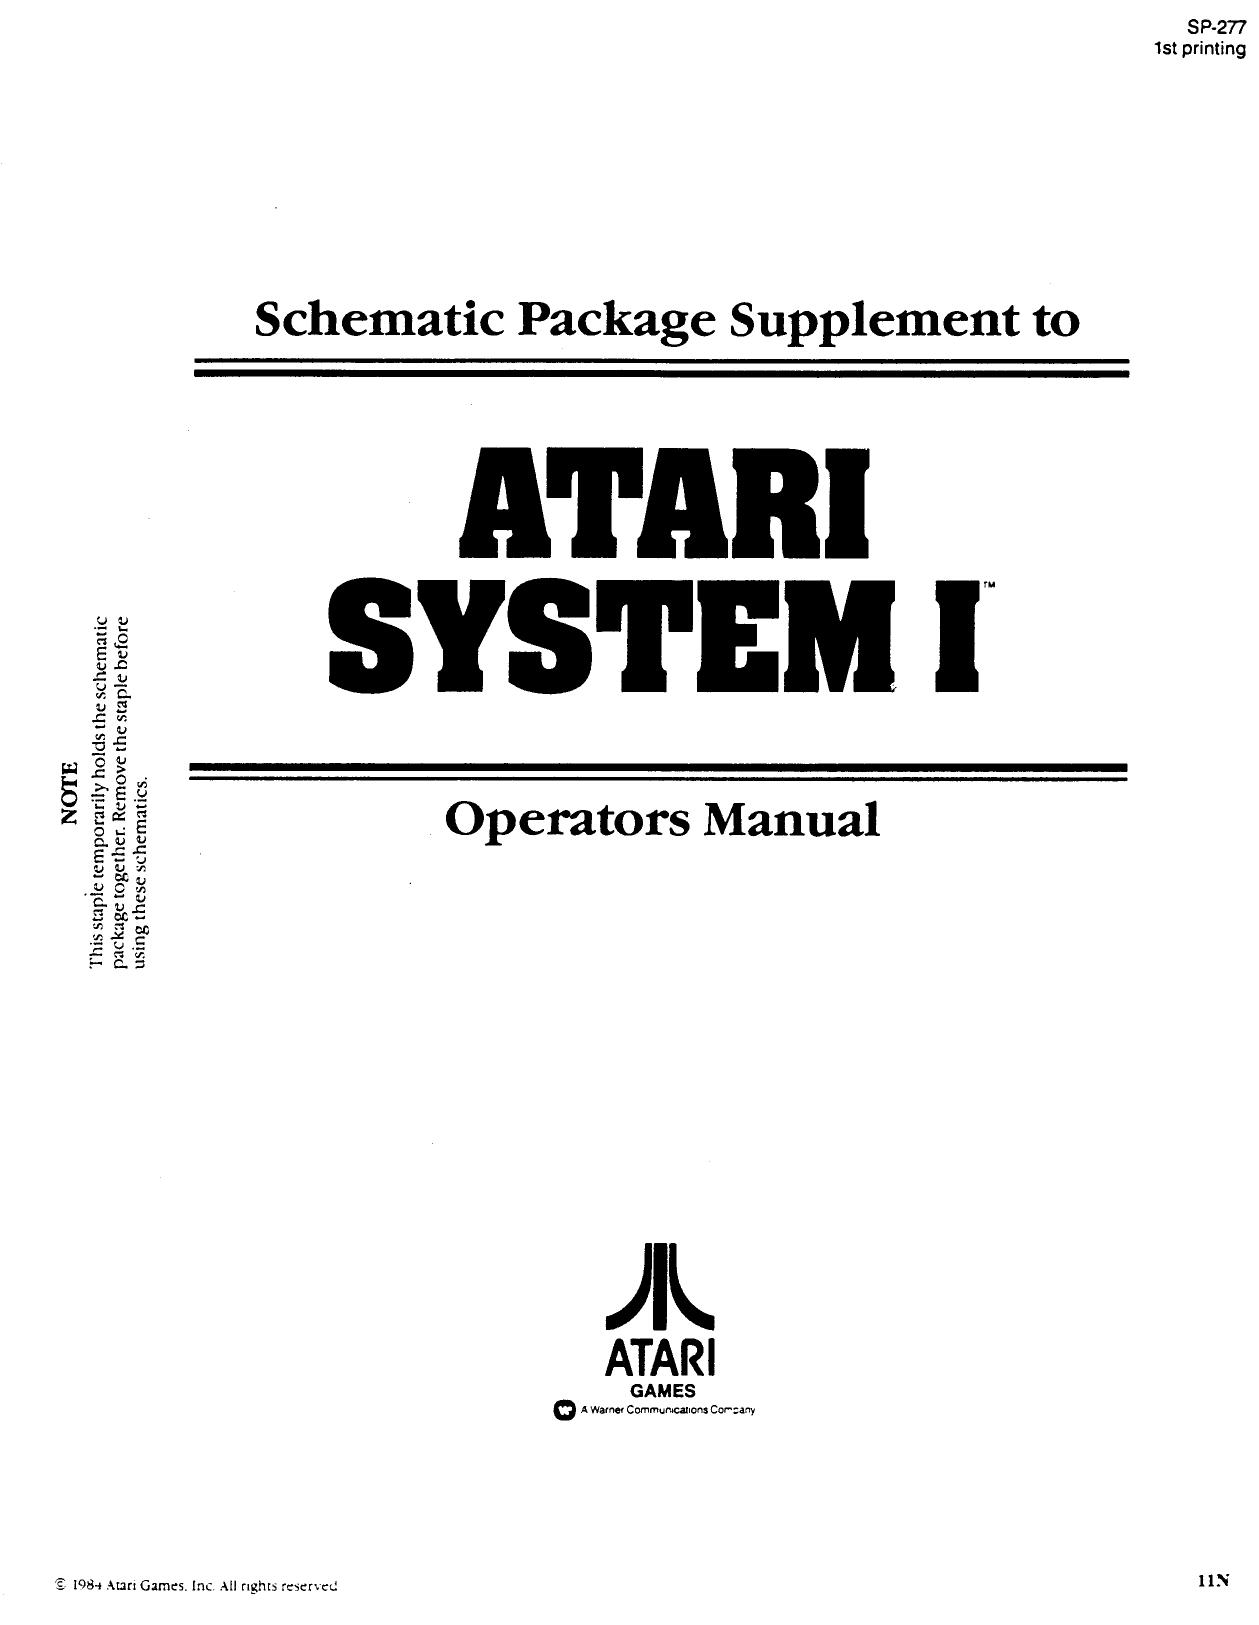 Atari System 1 SP-277 1st Printing (Schematic Package) (U)